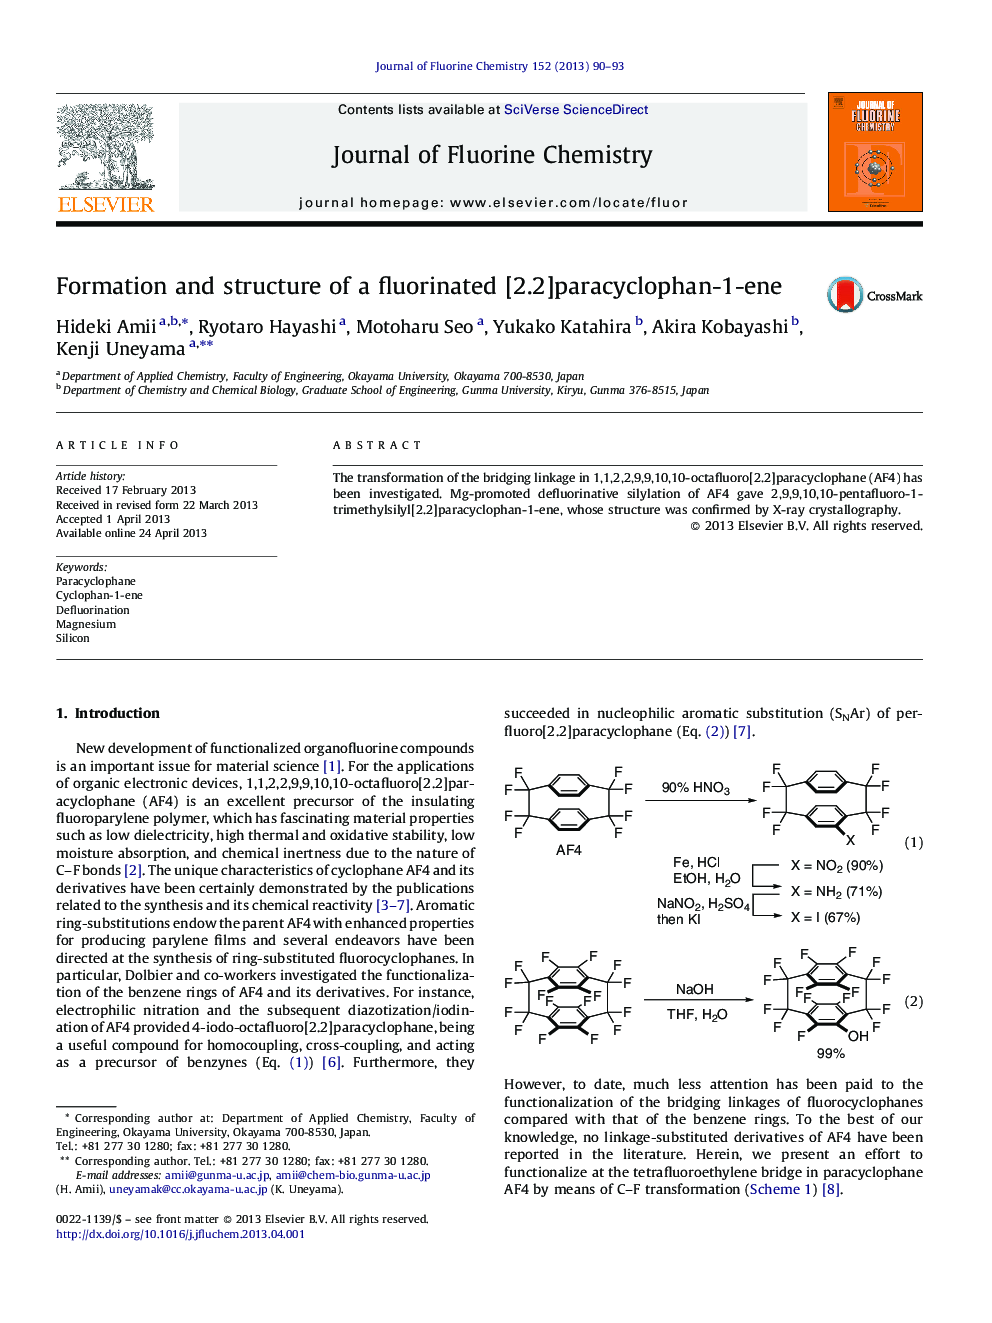 Formation and structure of a fluorinated [2.2]paracyclophan-1-ene